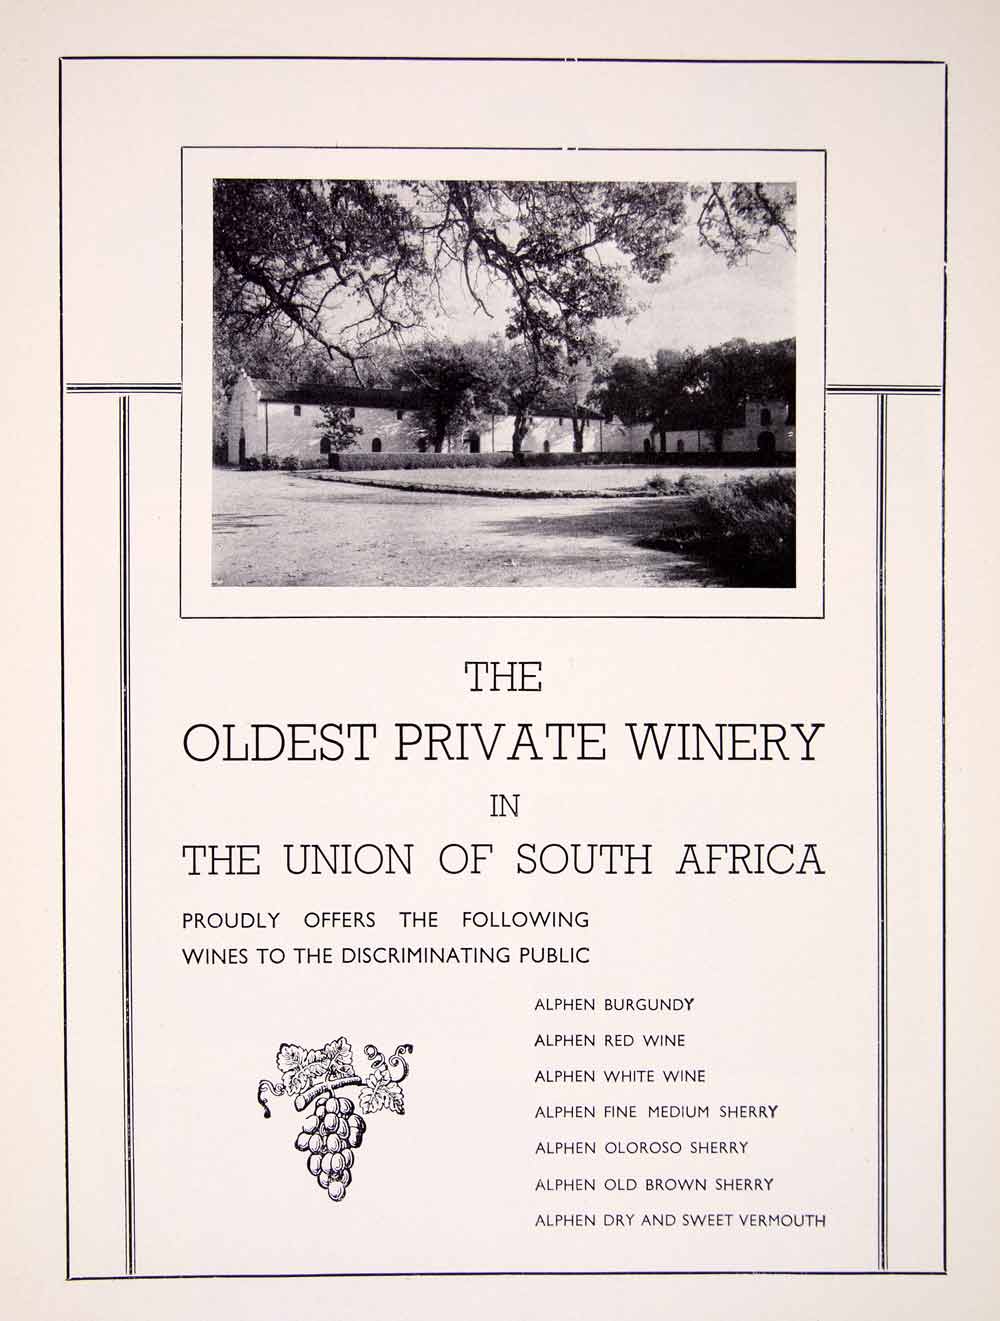 1948 Ad Oldest Private Winery Union South Africa Vineyard Landscape XGTC7